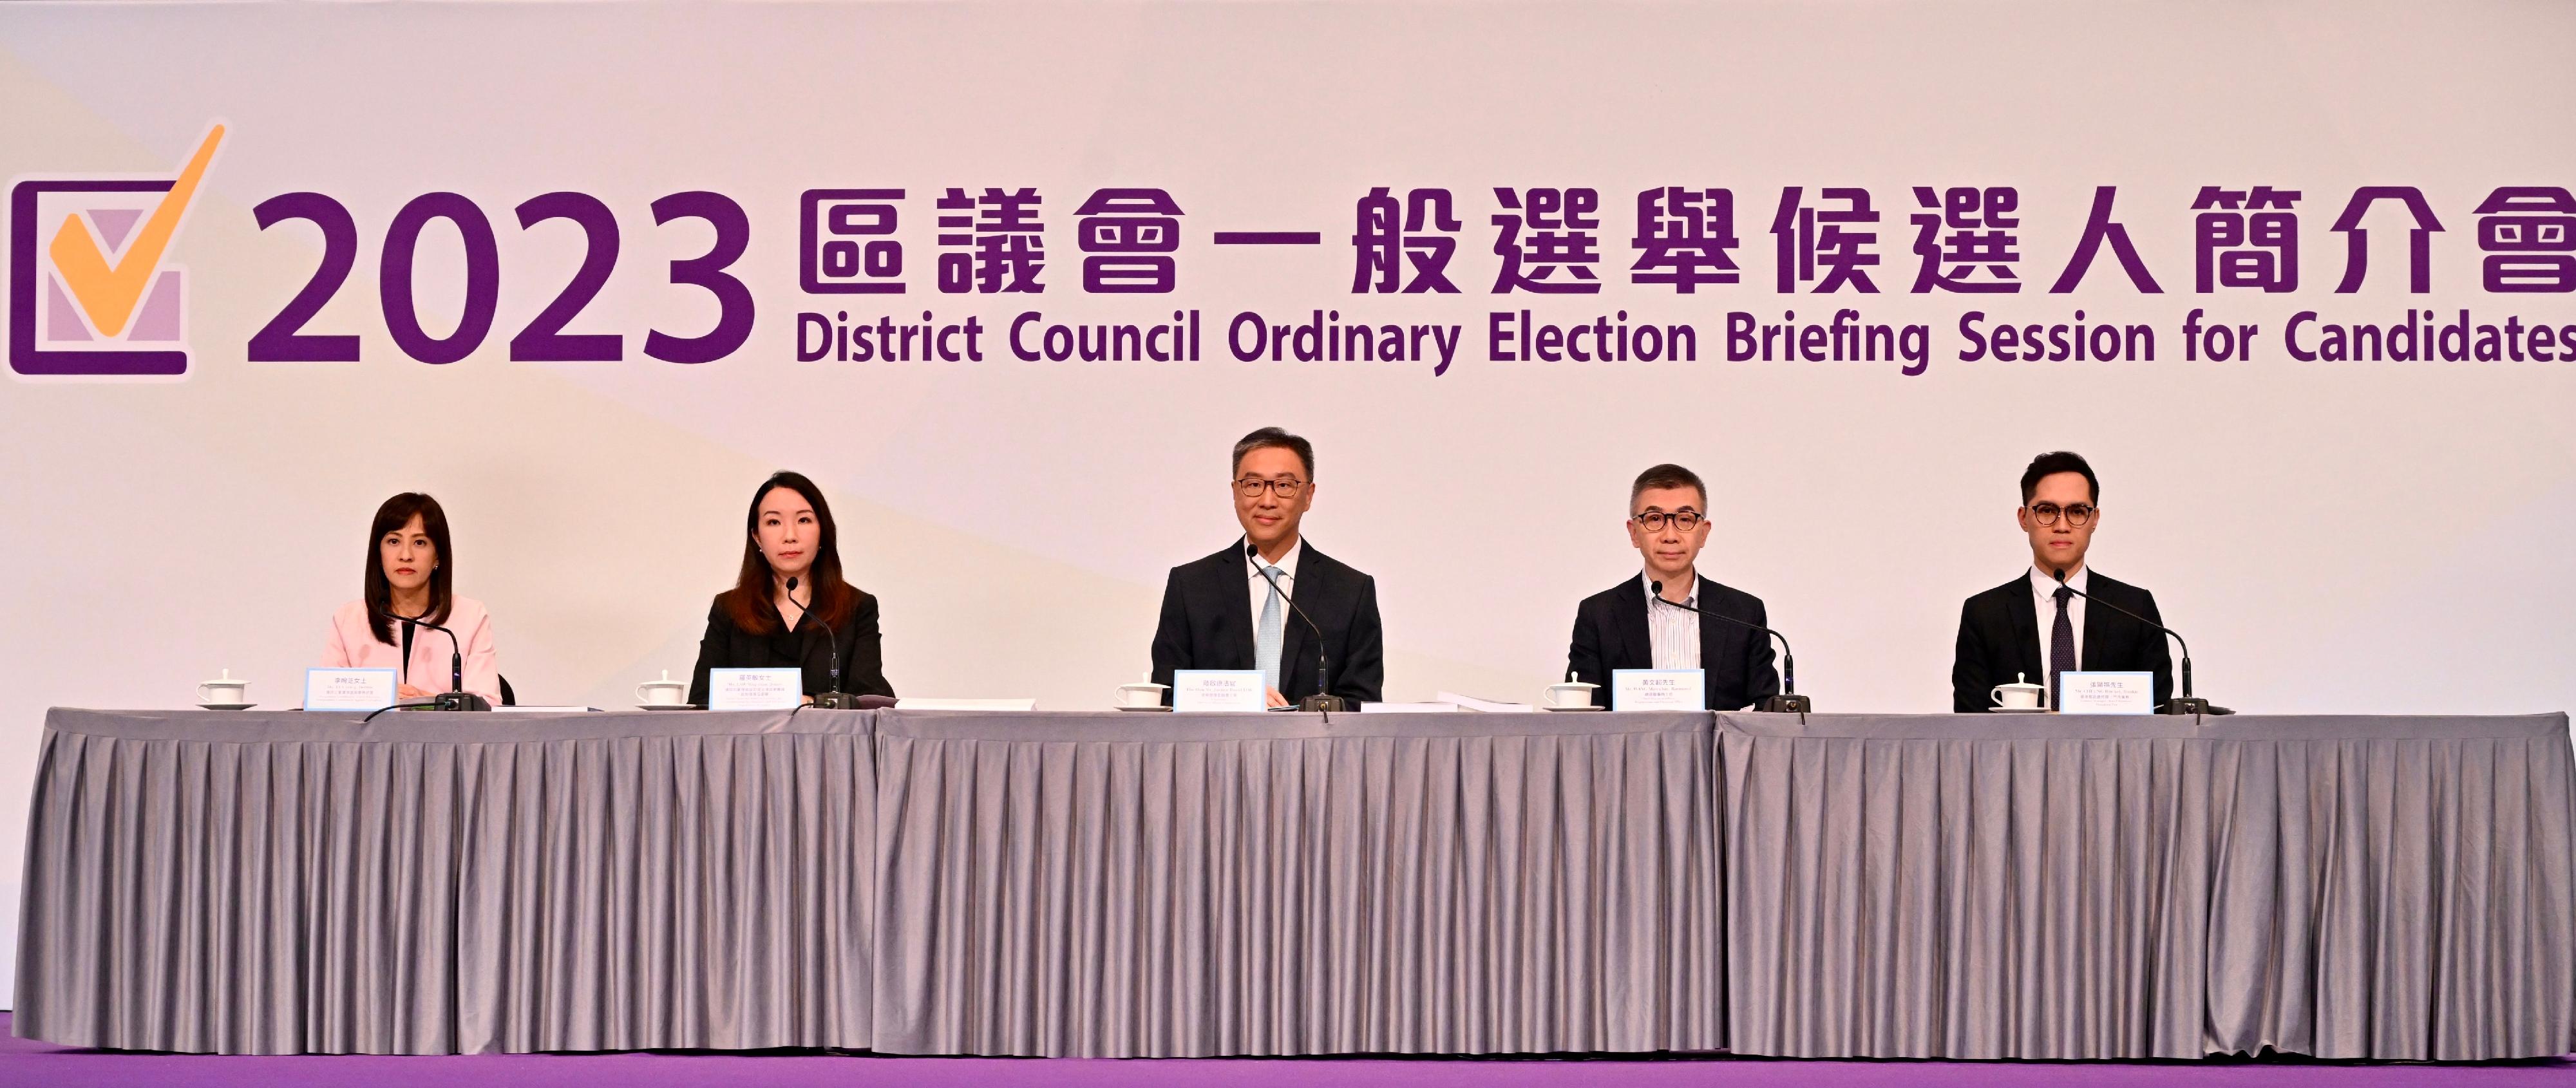 The Chairman of the Electoral Affairs Commission, Mr Justice David Lok, conducted a briefing tonight (November 13) for the candidates of the 2023 District Council Ordinary Election on the electoral arrangements, the guidelines on election-related activities and important points to note in running their electioneering activities. Photo shows (from left) the Programme Co-ordinator (Clean Elections) of the Independent Commission Against Corruption, Ms Debbie Ly; the Senior Assistant Solicitor General (Constitutional Development and Elections) of the Department of Justice, Ms Jenny Law; Mr Justice Lok; the Chief Electoral Officer of the Registration and Electoral Office, Mr Raymond Wang; and the General Manager (Retail Business) of Hongkong Post, Mr Hankie Cheung.